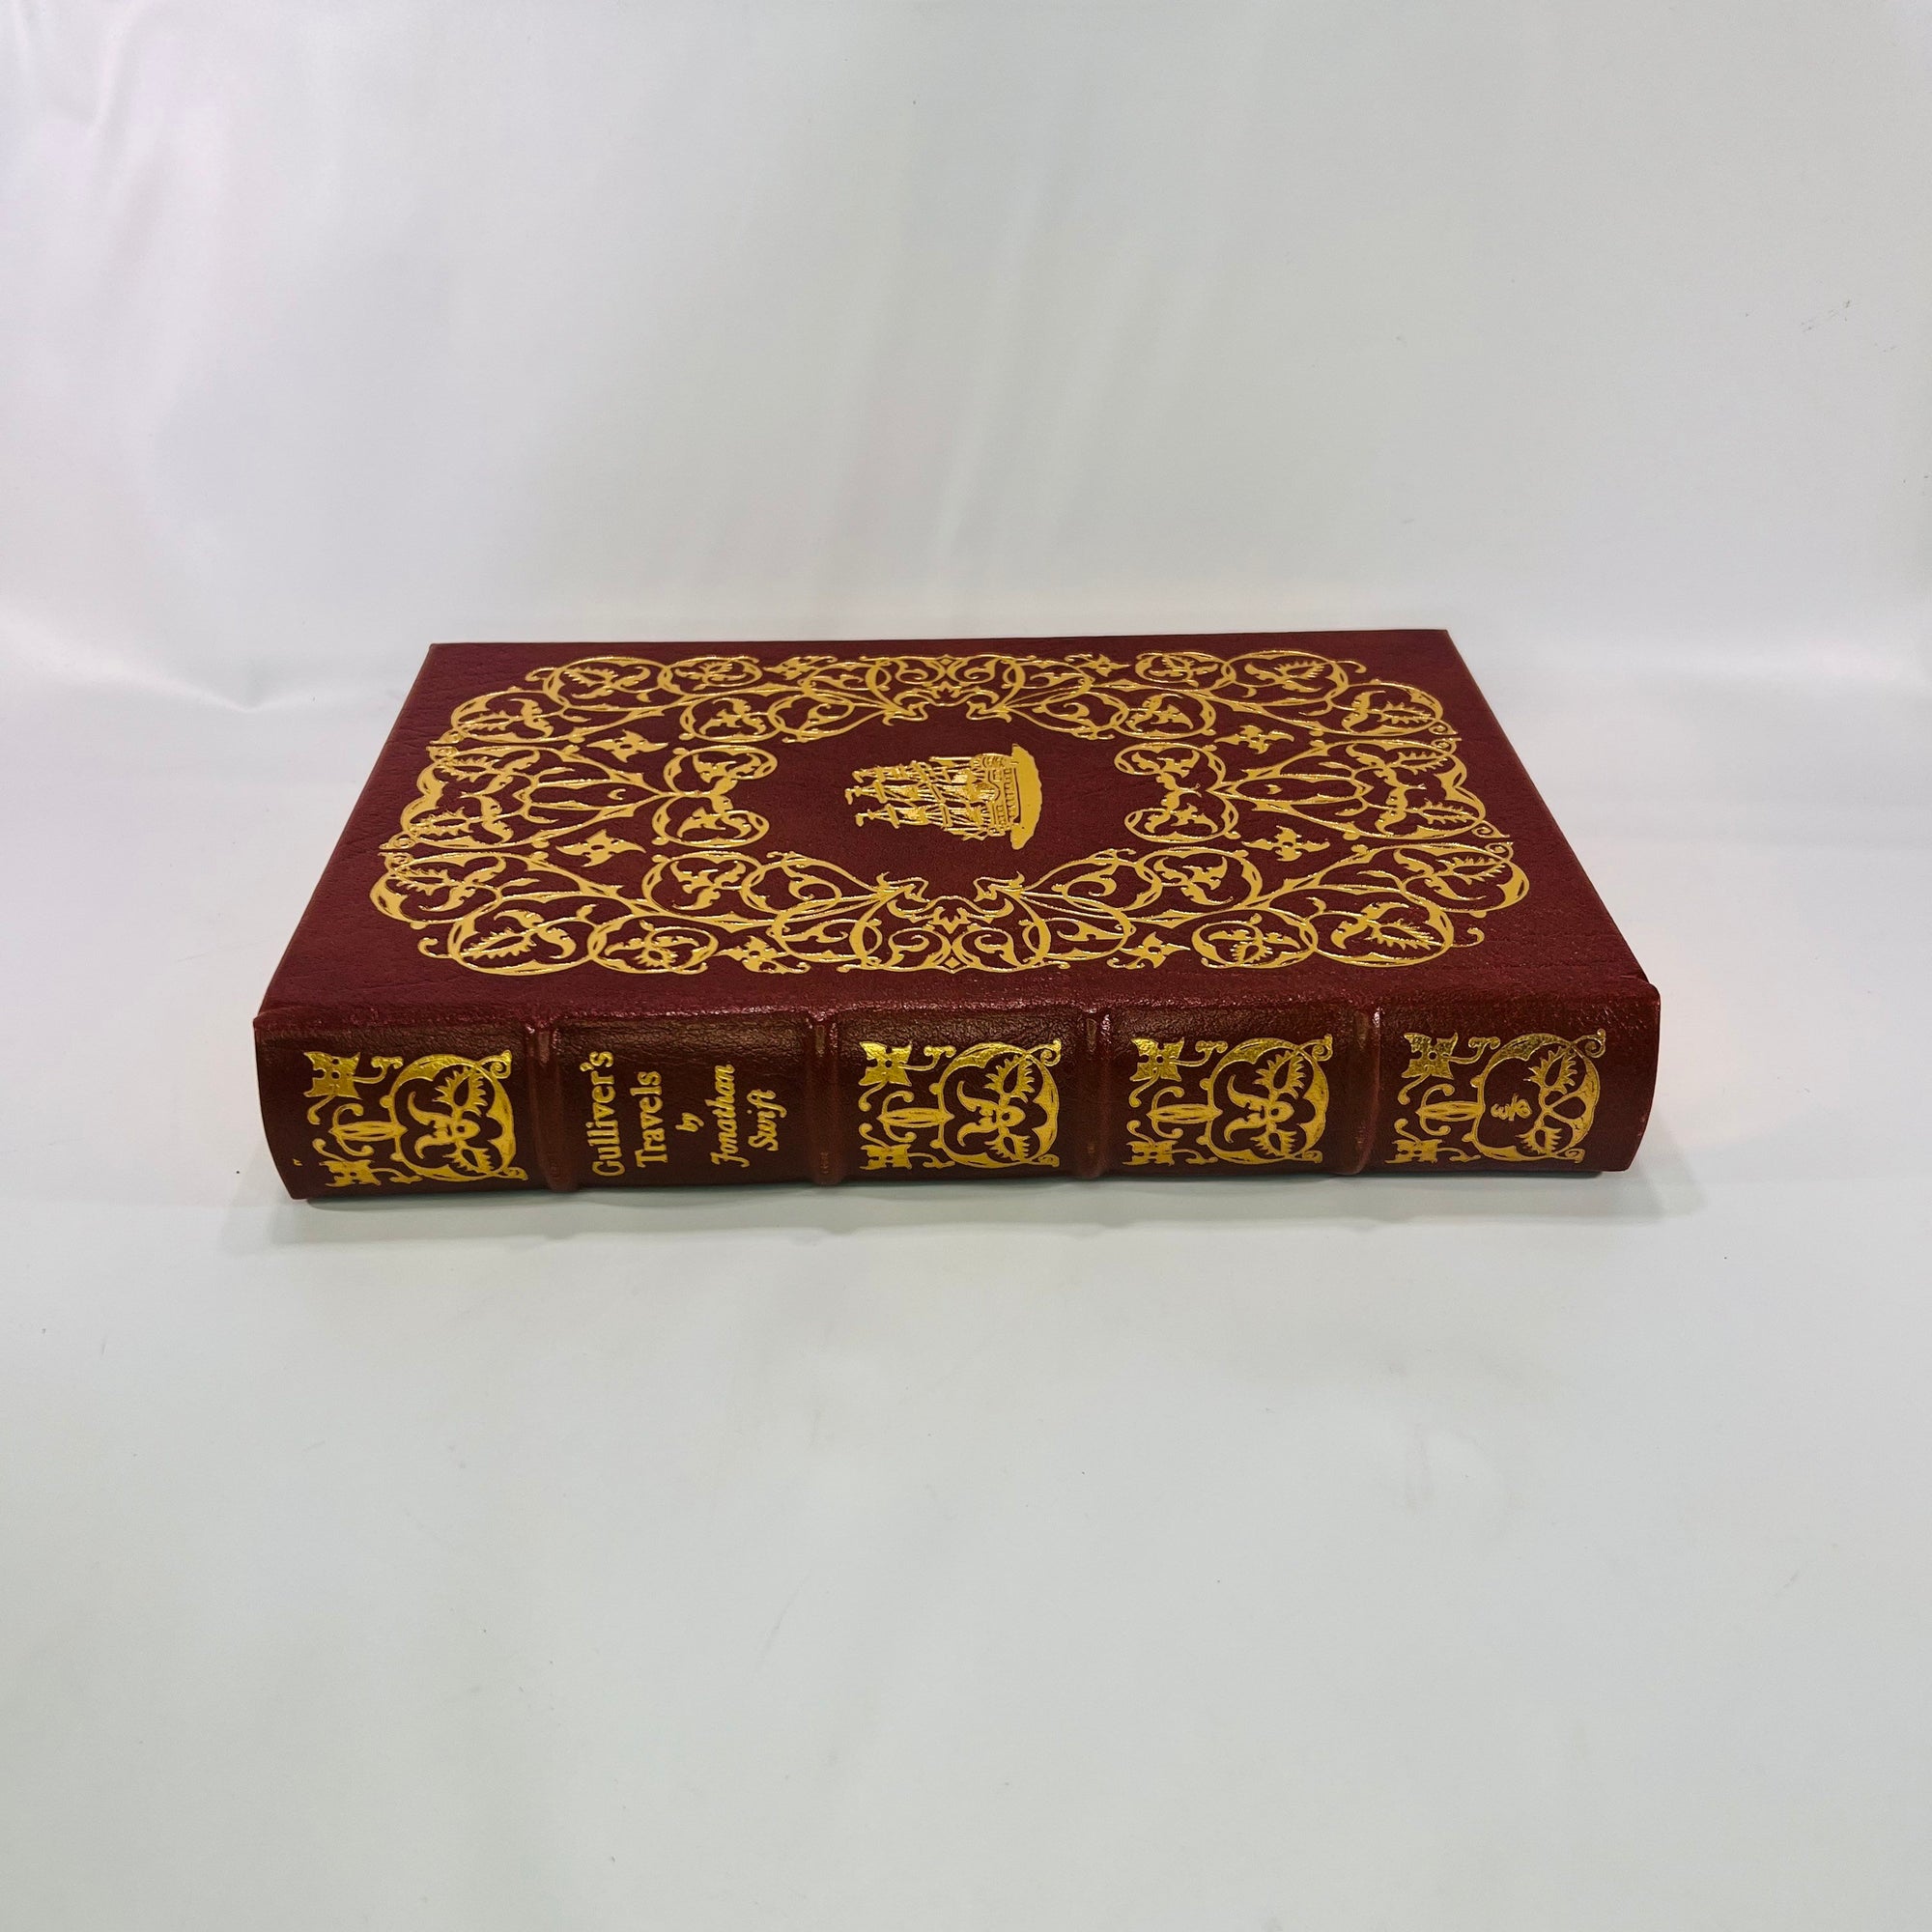 Gulliver's Travels by Jonathan Swift with Wood Engravings 1972 Vintage Classic Easton Press Collectable Leather Bound Book Gold Gilt Pages